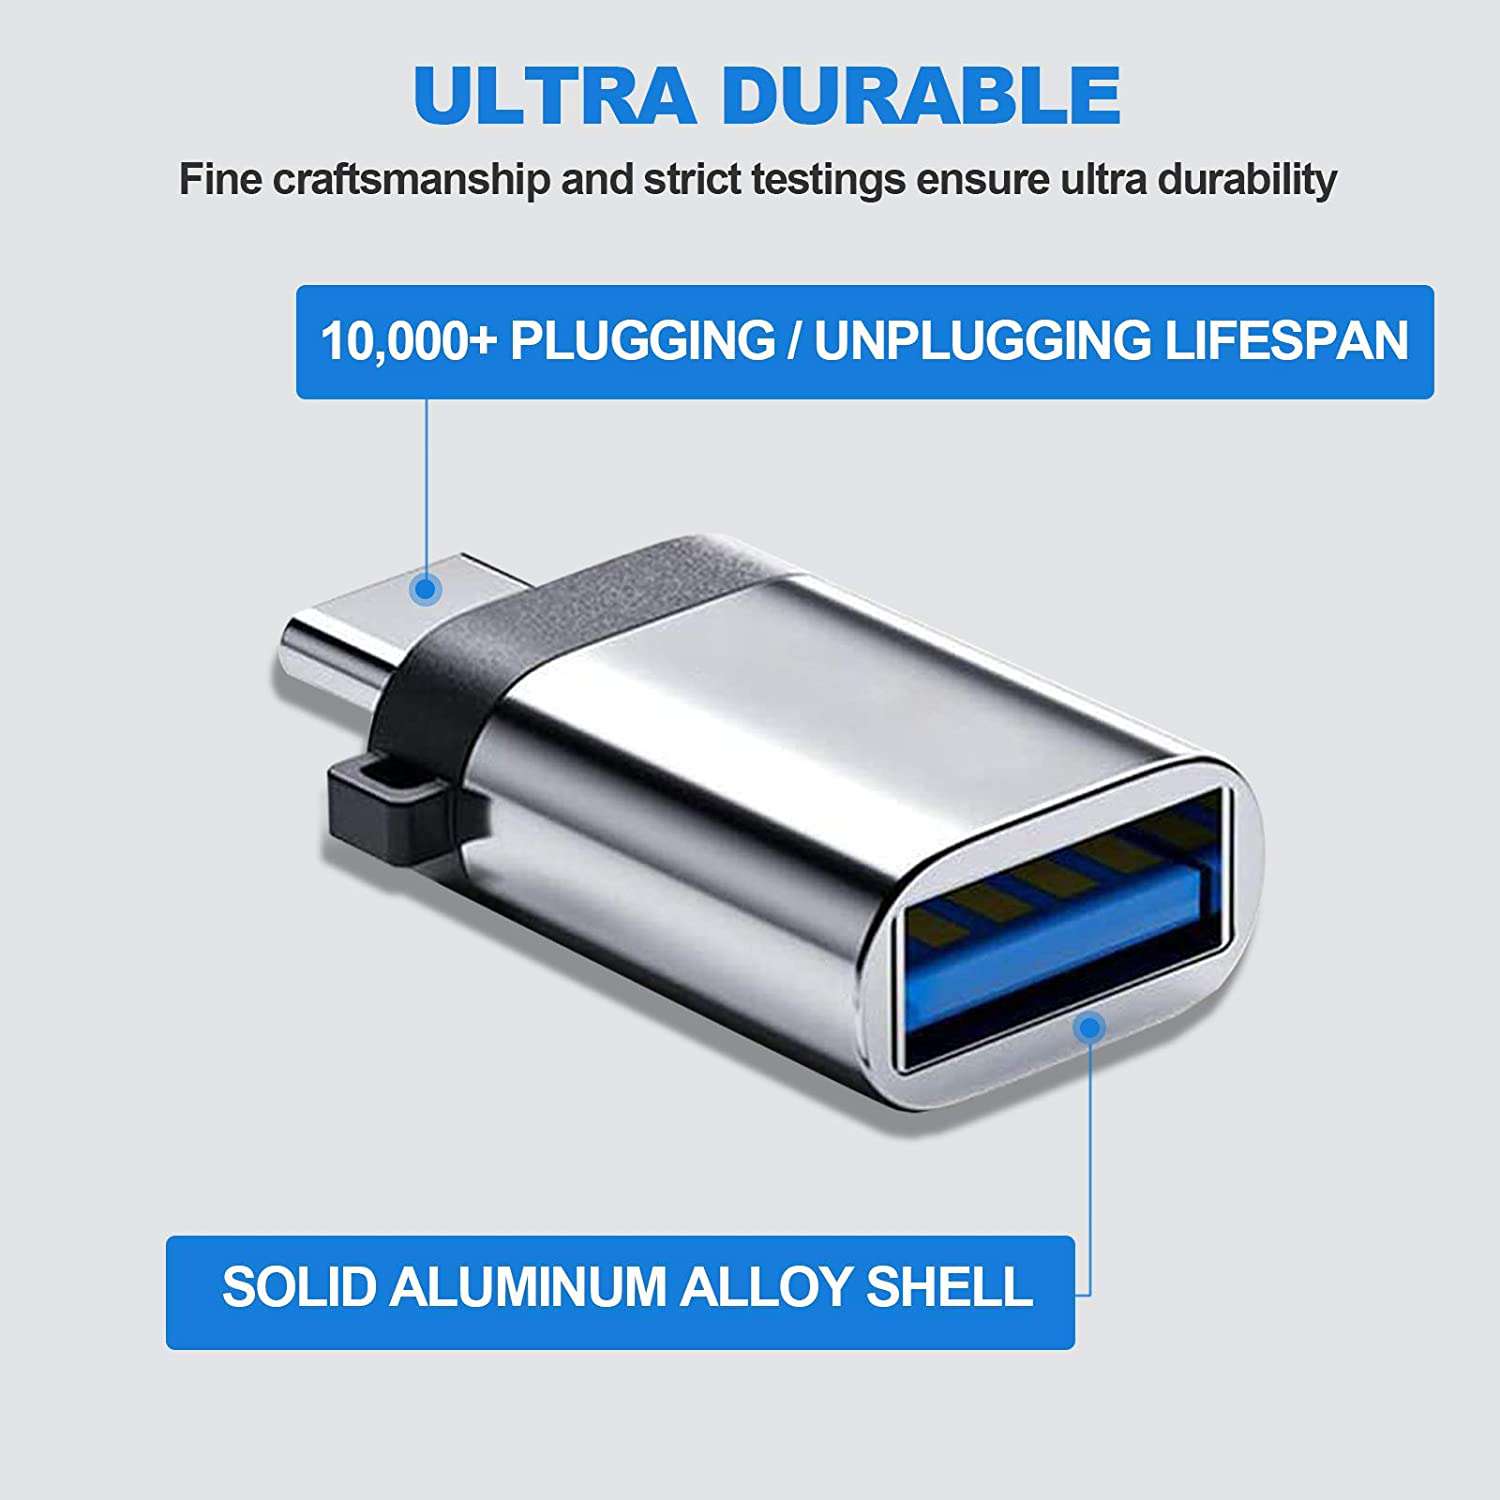 Adapter with durable aluminum alloy housing, supports over 10,000 insertions